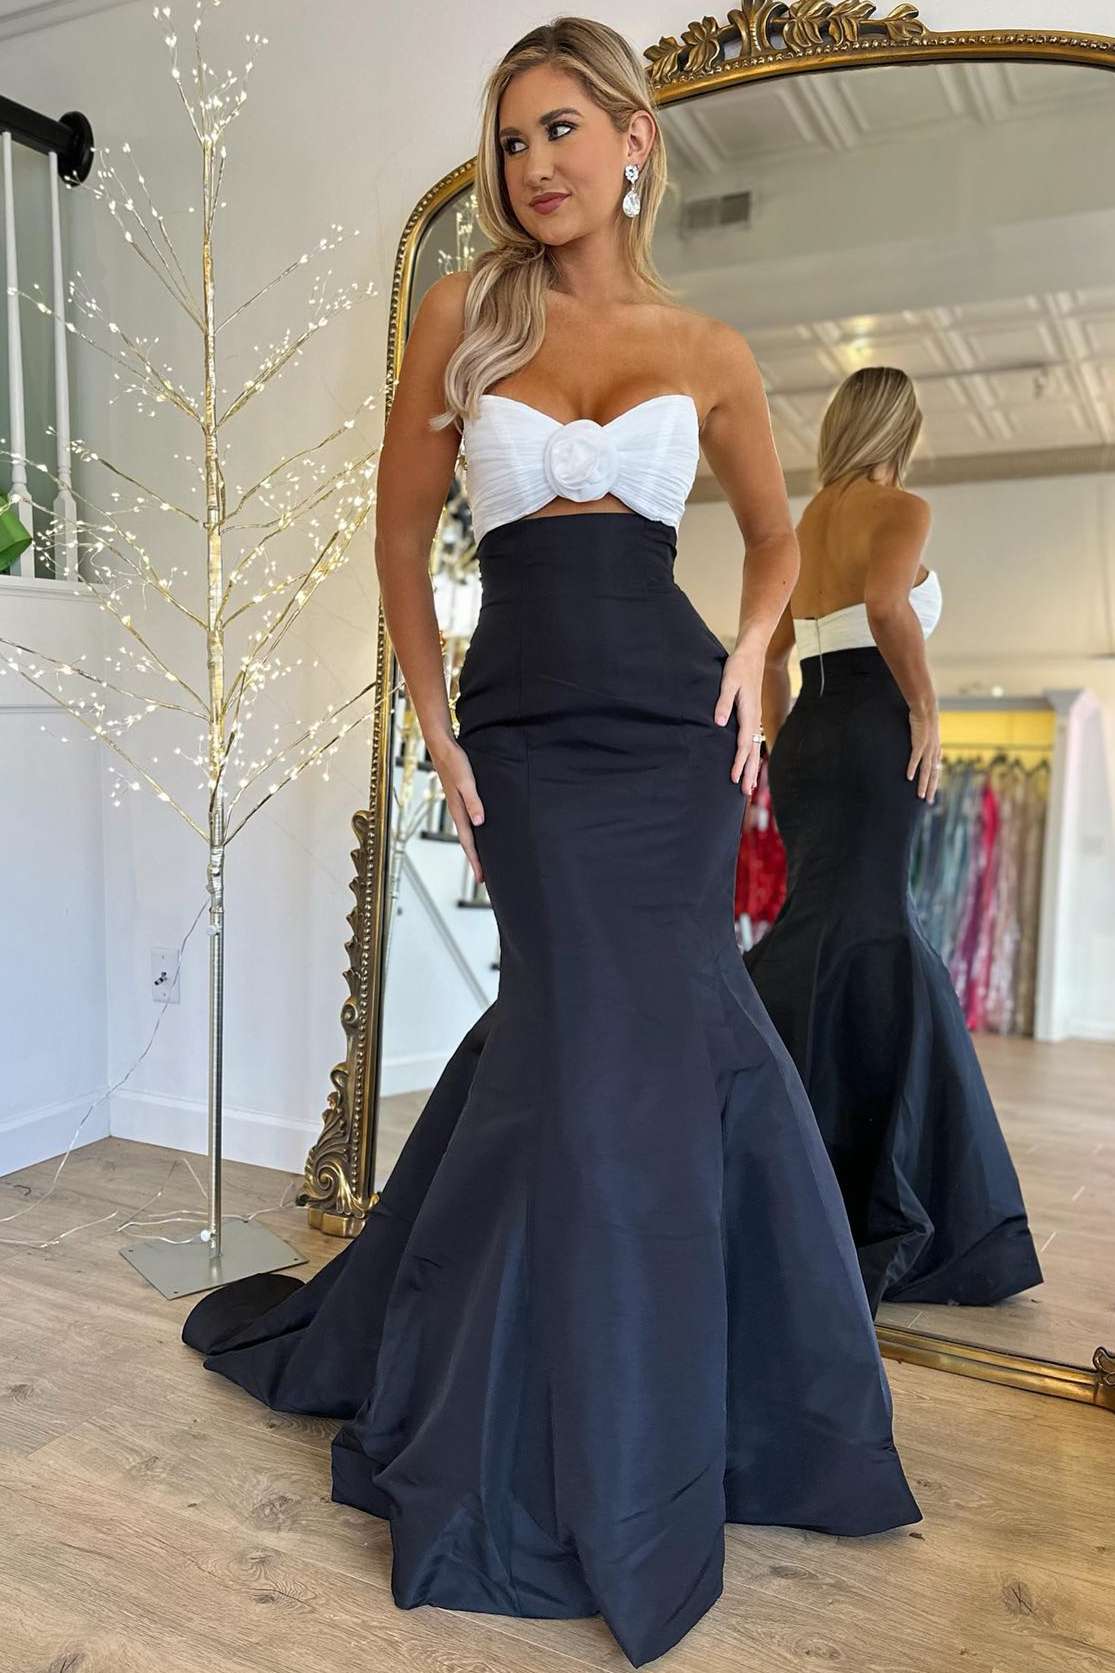 Julie, Strapless White and Black Ruched Mermaid Prom Dress